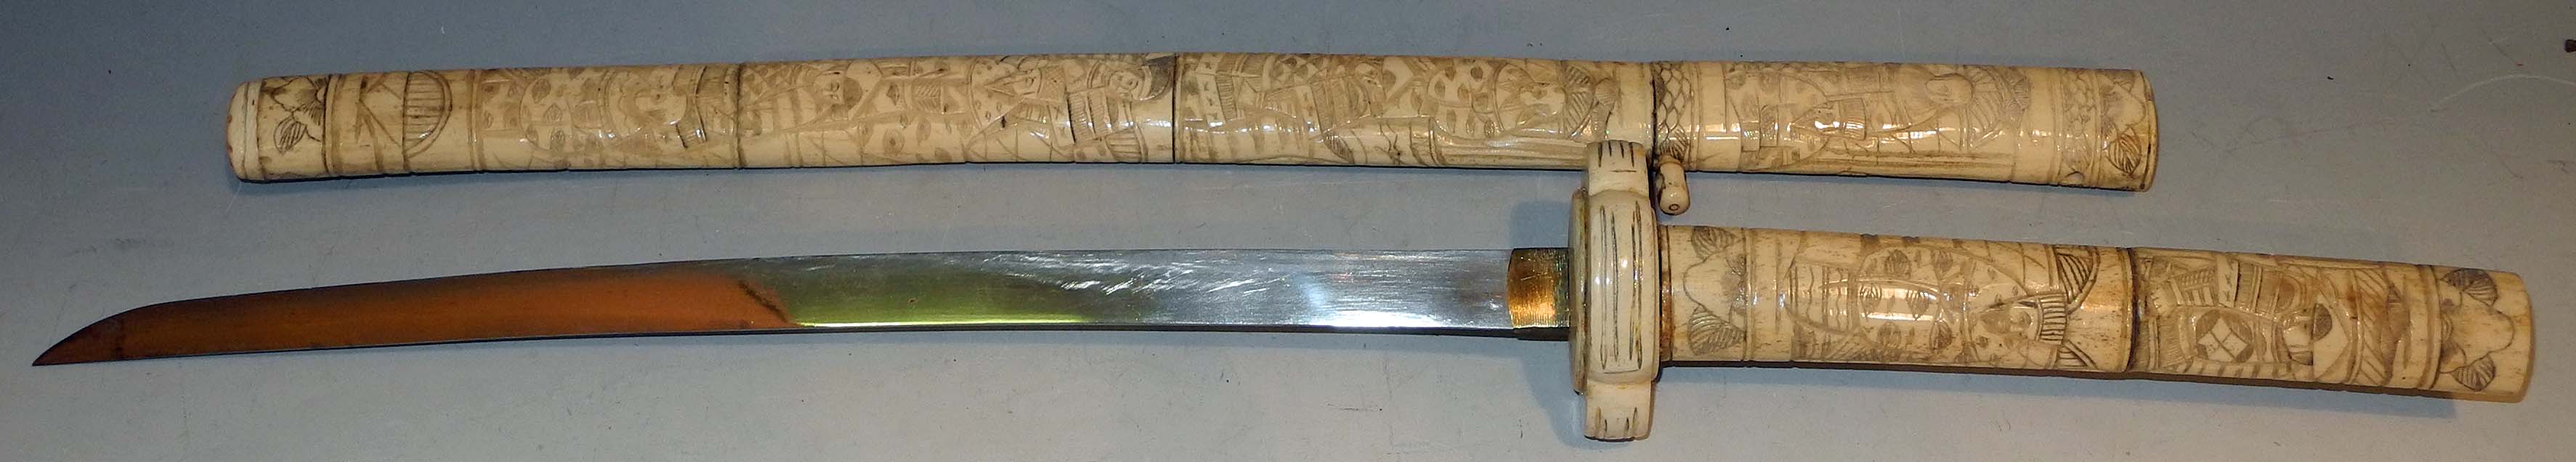 A Japanese short sword of Shin-Gunto form, part bone decorated handle and scabbard, all over